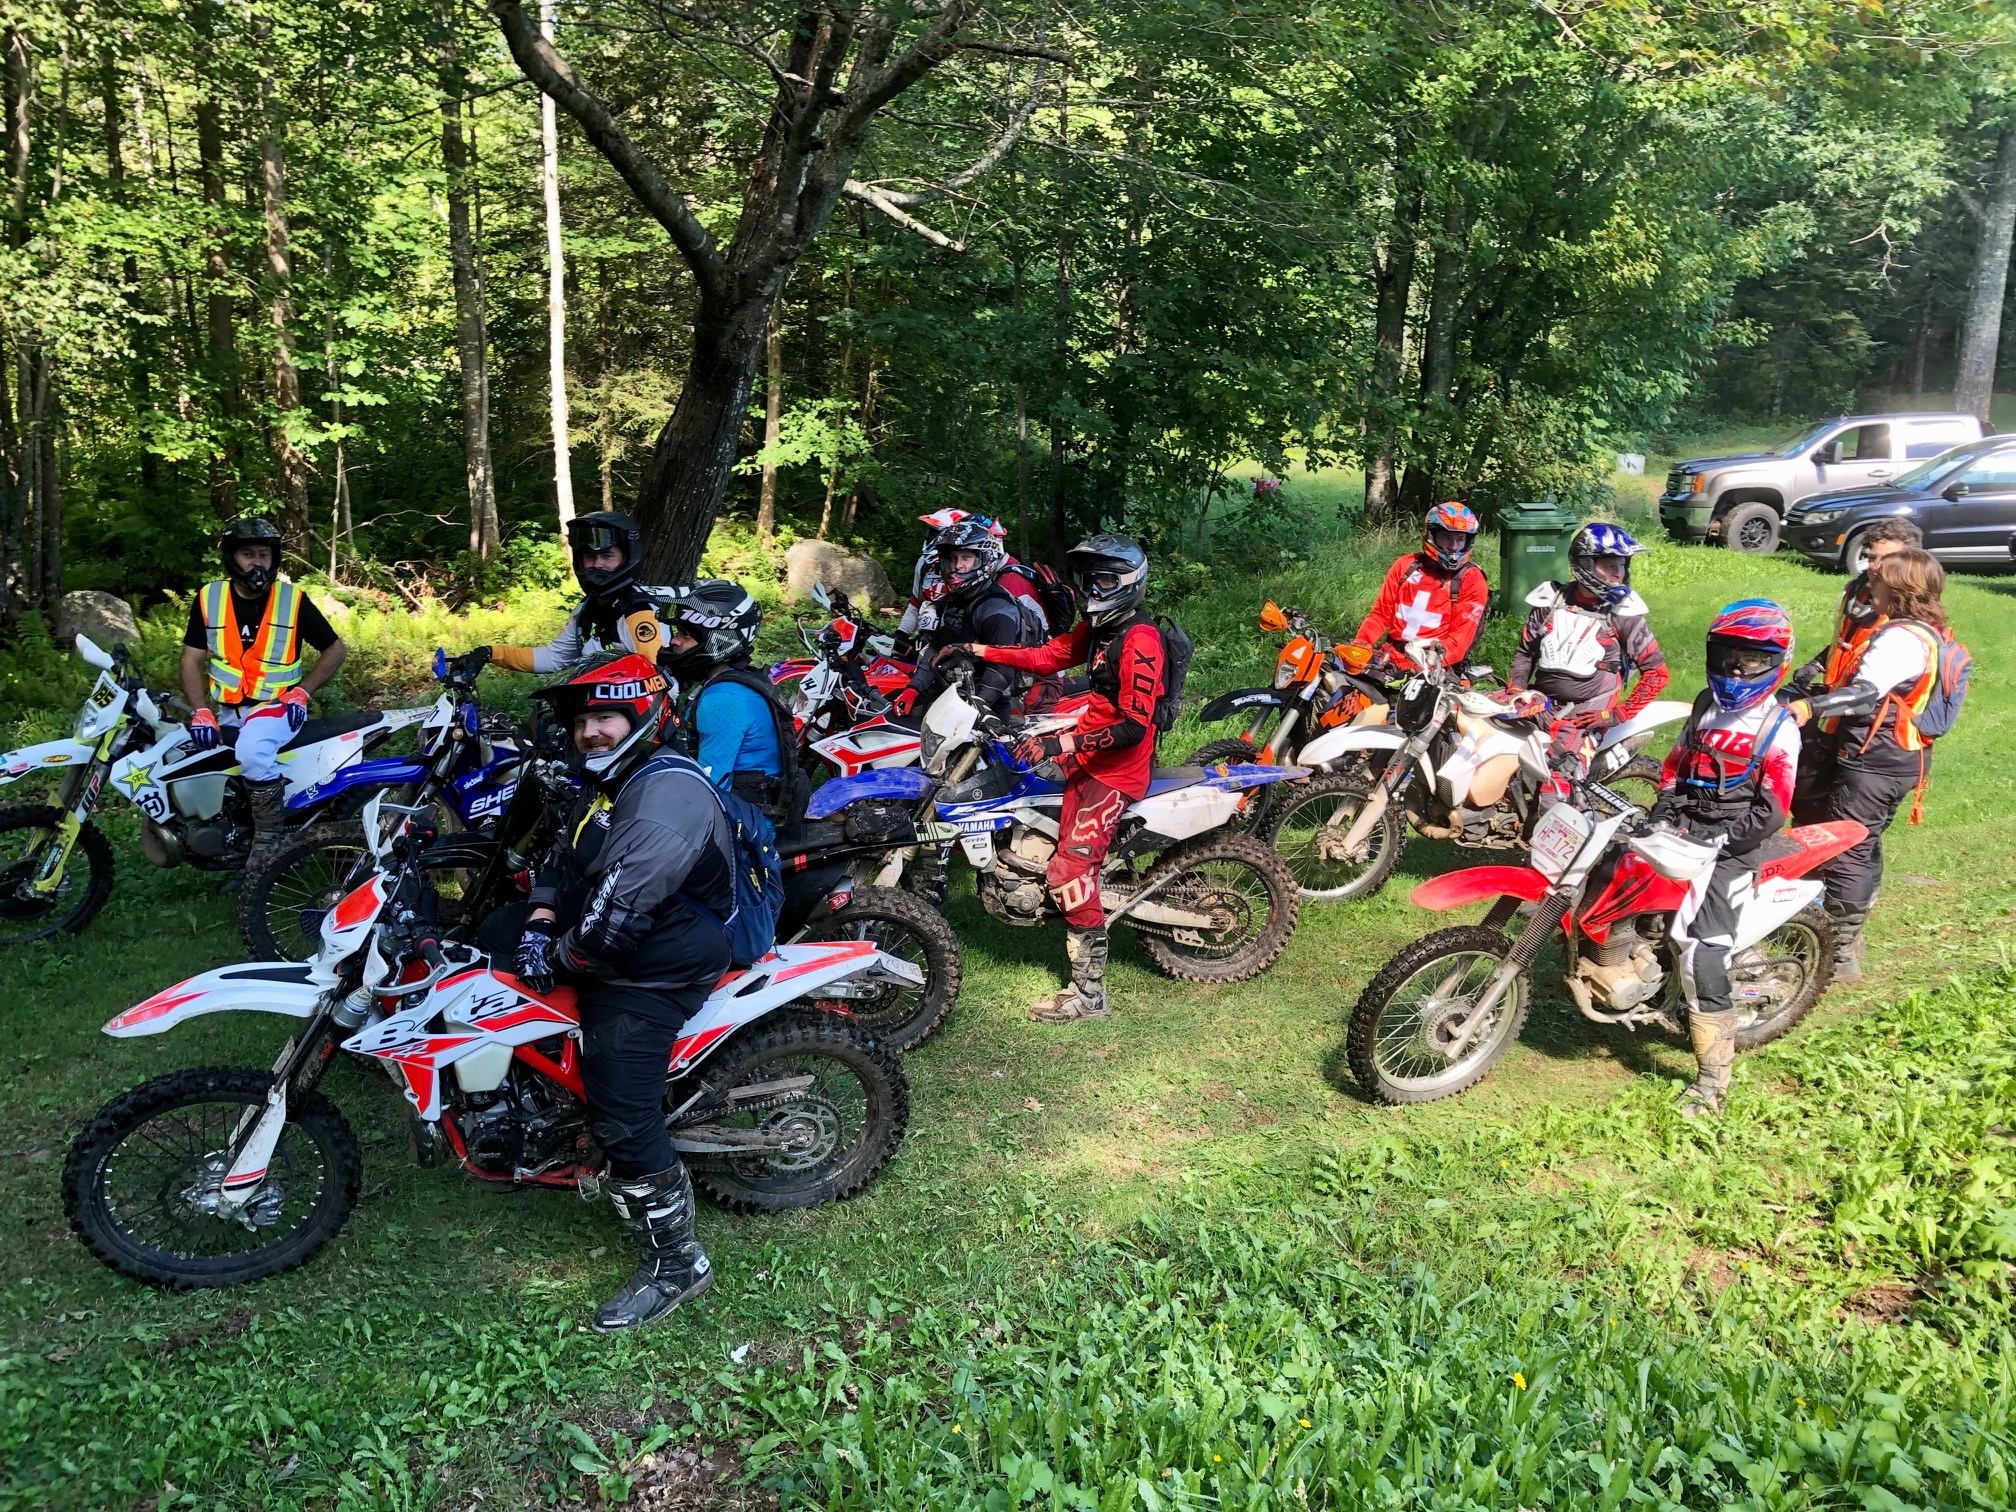 Dirt bike riders getting ready to head into the woods